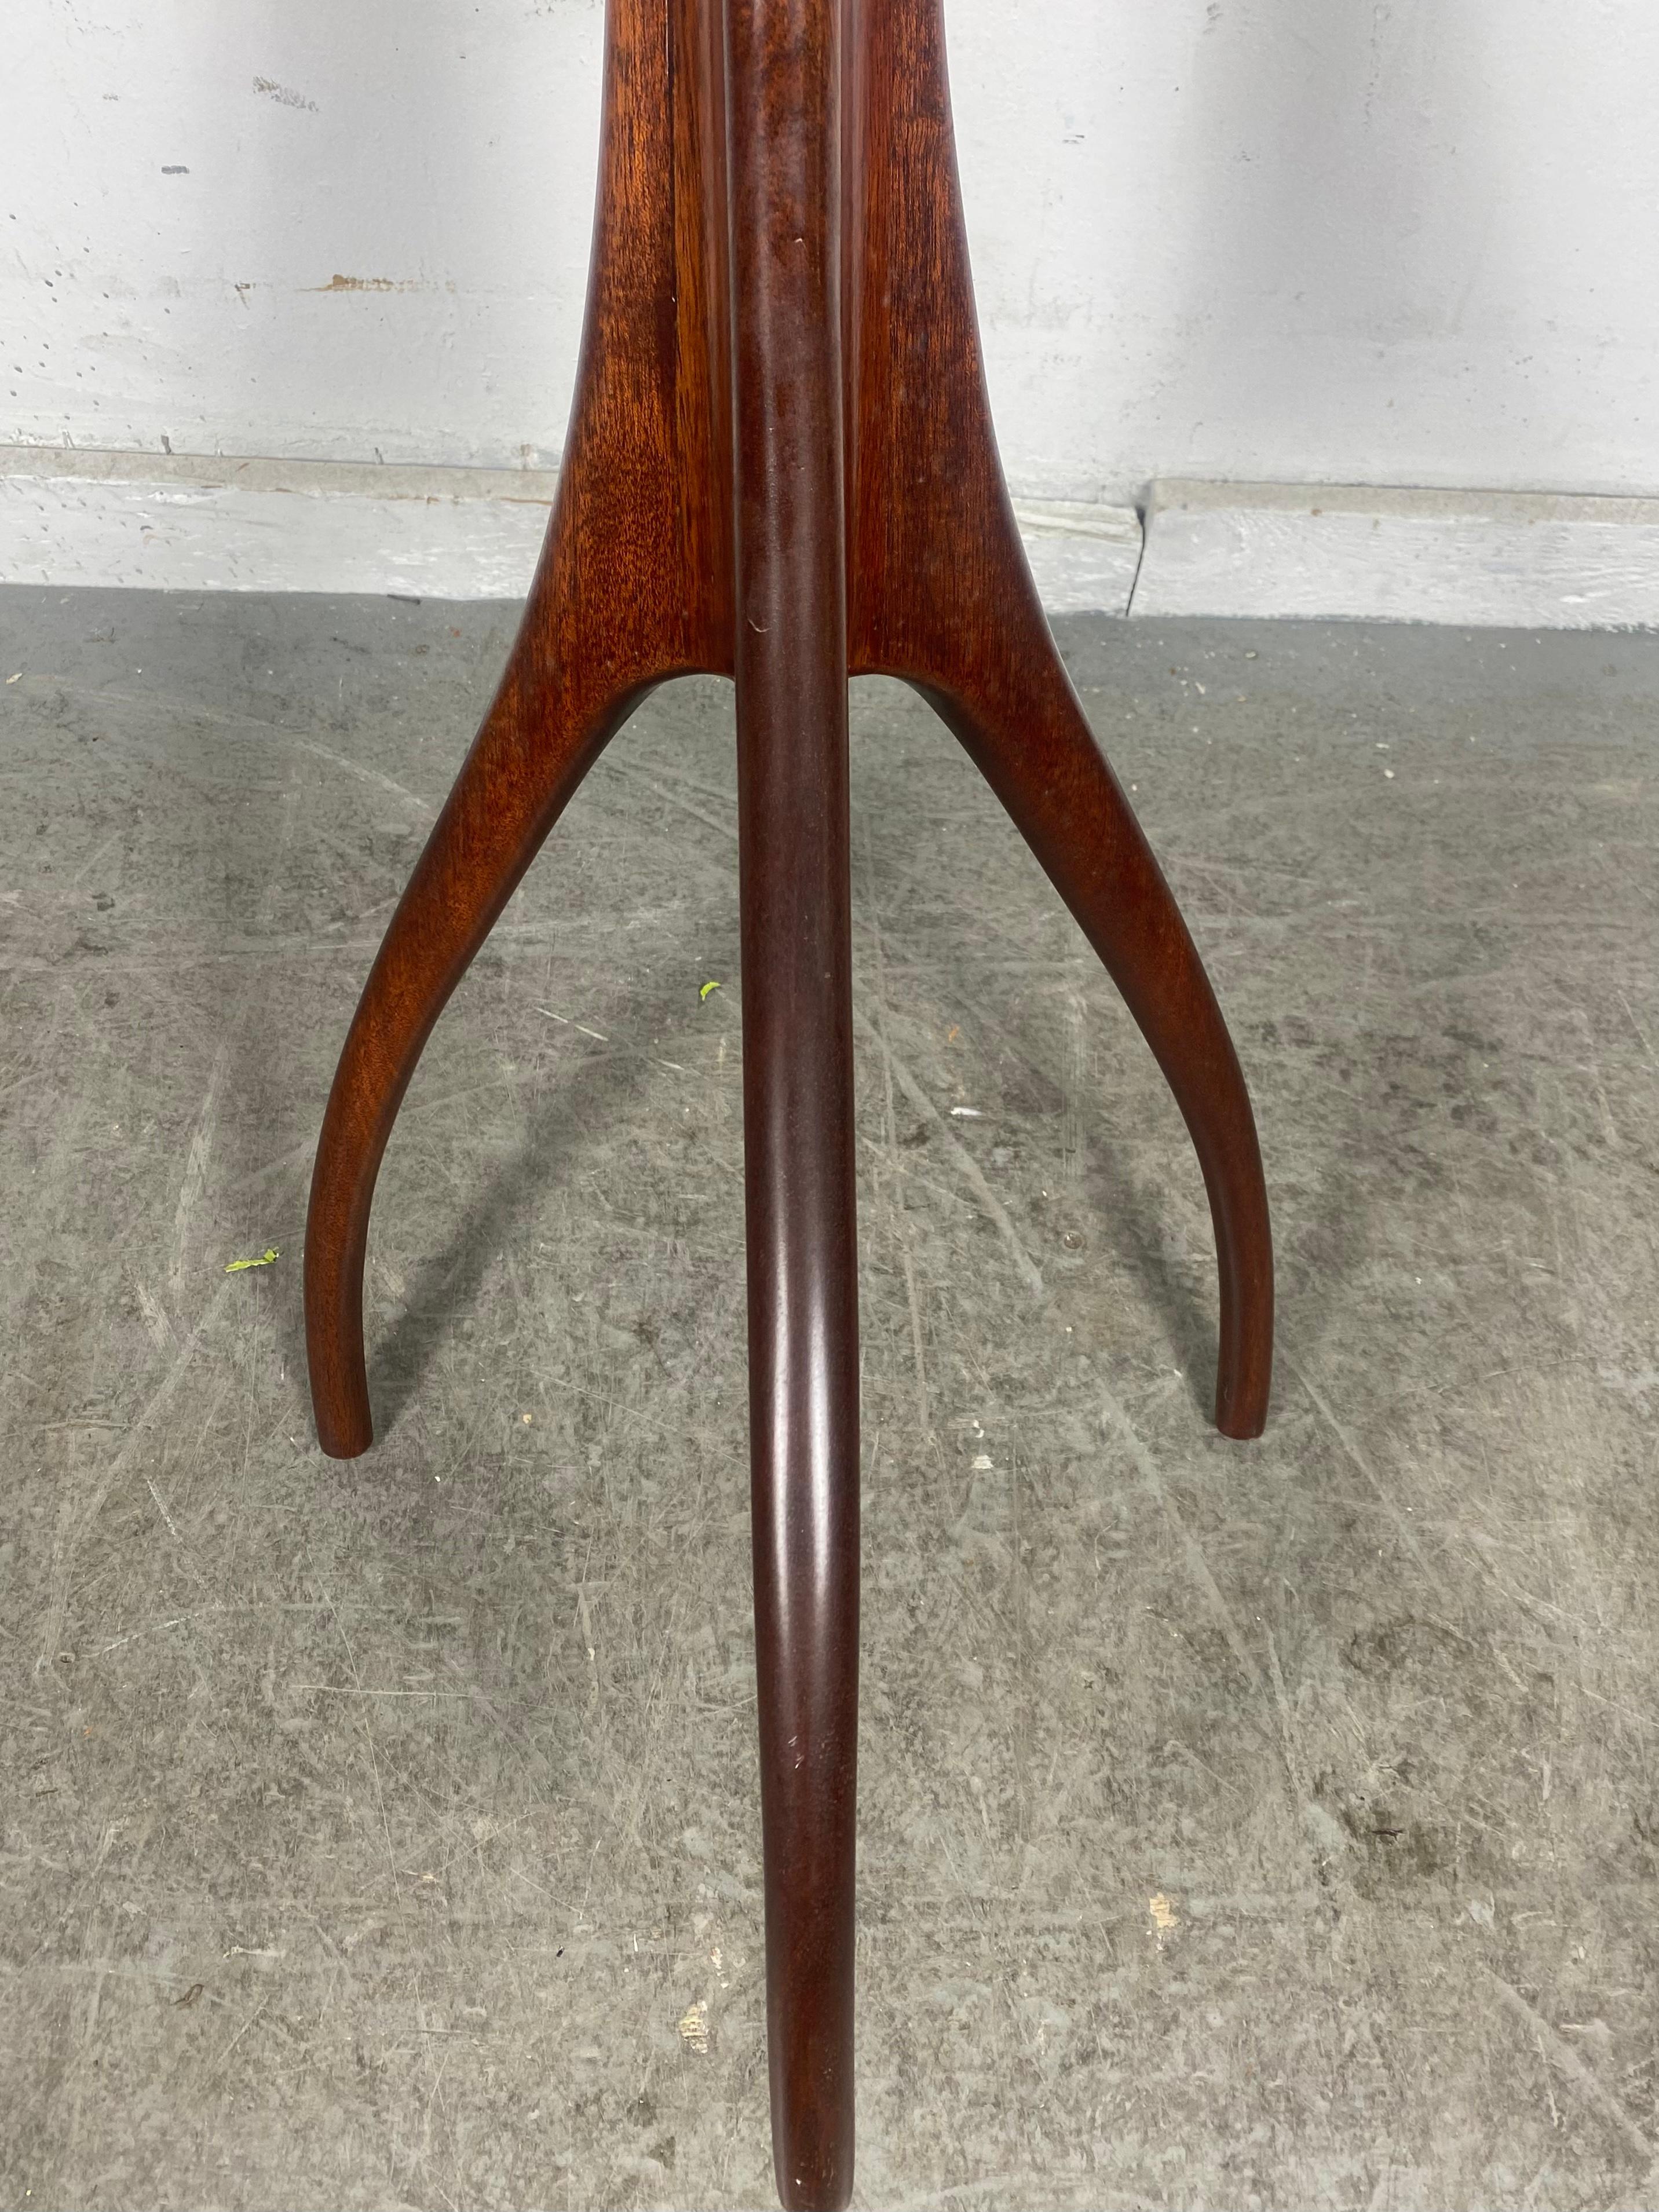 Stylish Midcentury Mahogany Tripod Lamp Table / Stand Attrib to Edward Wormley In Good Condition For Sale In Buffalo, NY